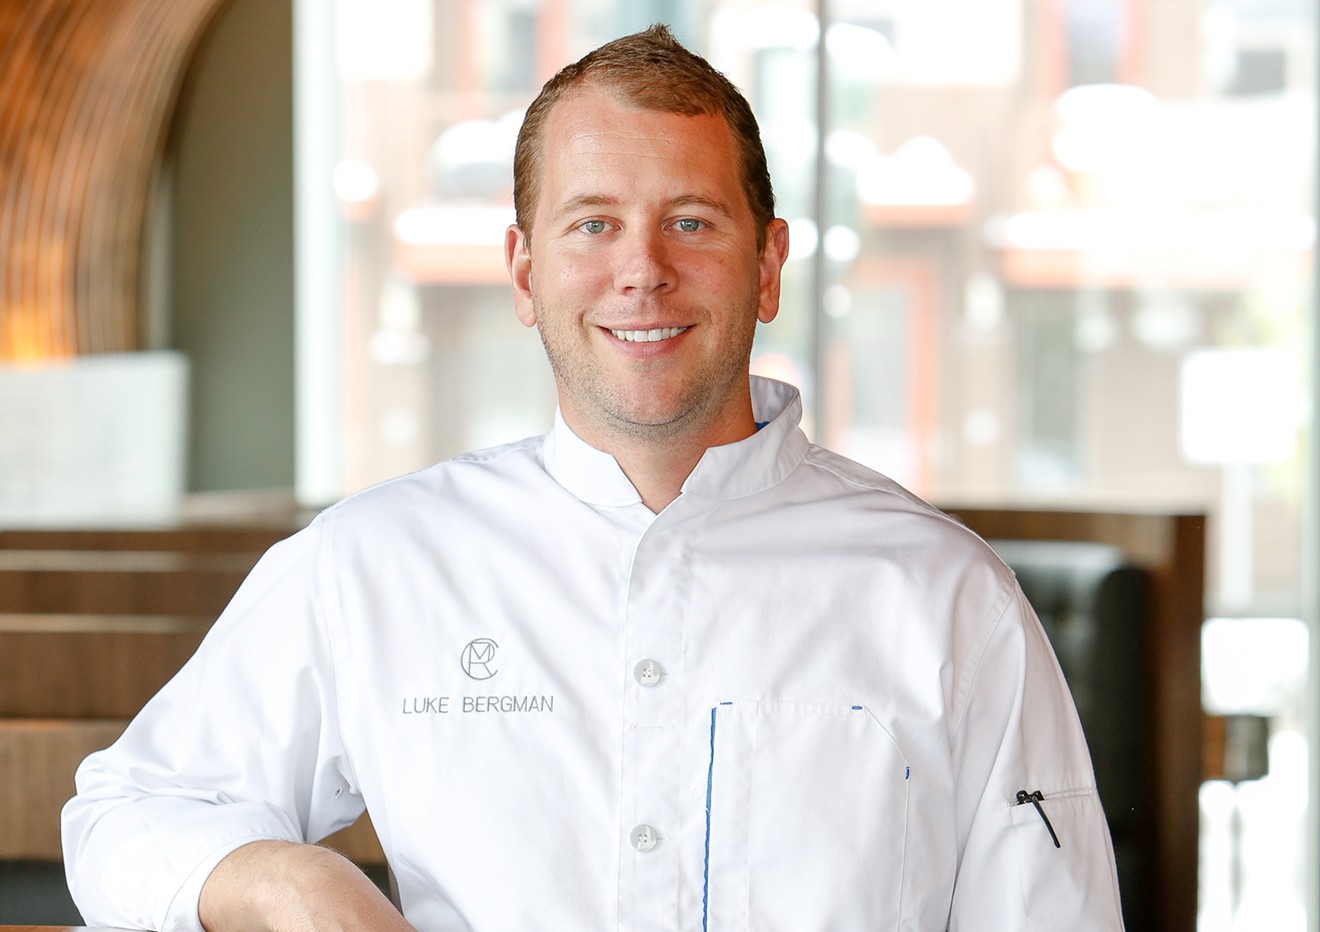 Luke Bergman came to Colorado with one condition: that he could one day open his own restaurant.